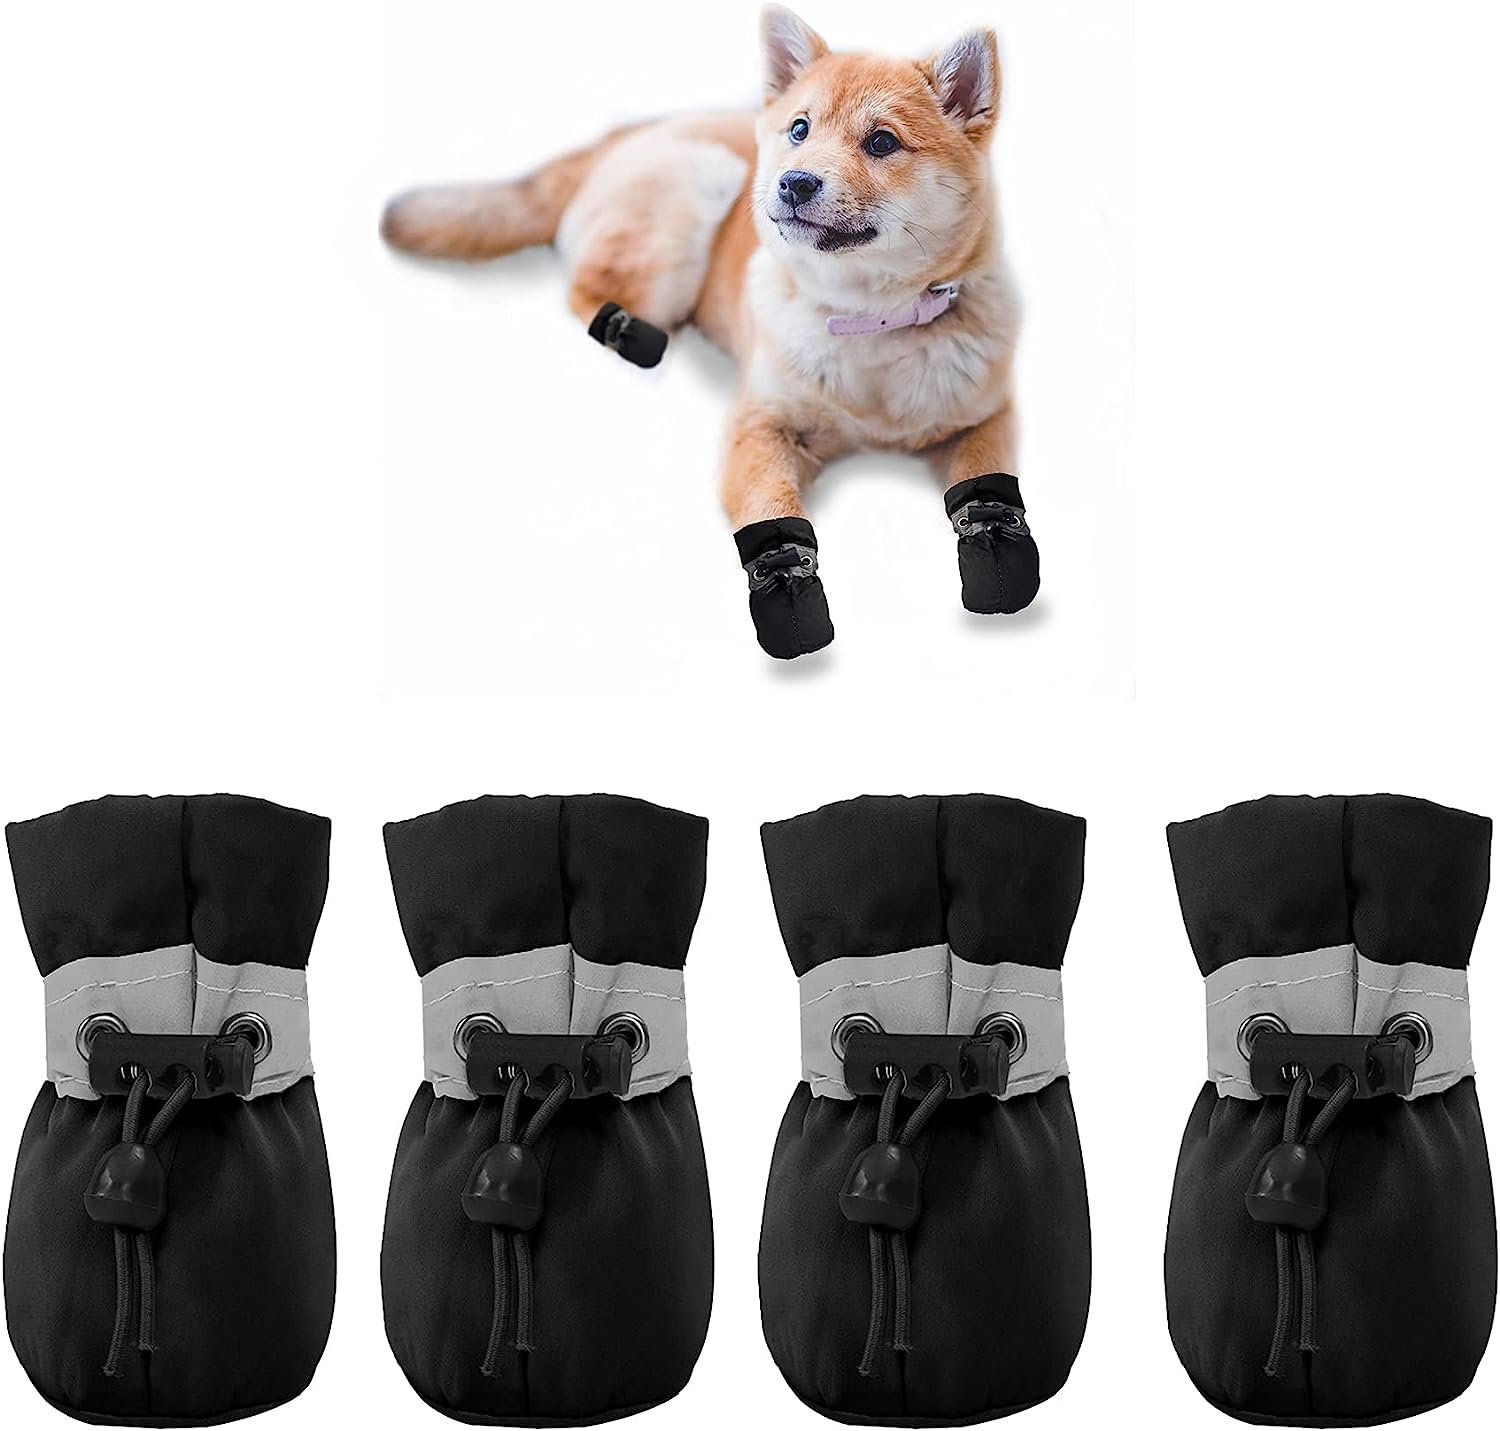 YAODHAOD Dog Shoes for Small Dogs Anti-Slip Dogs Boots [...]